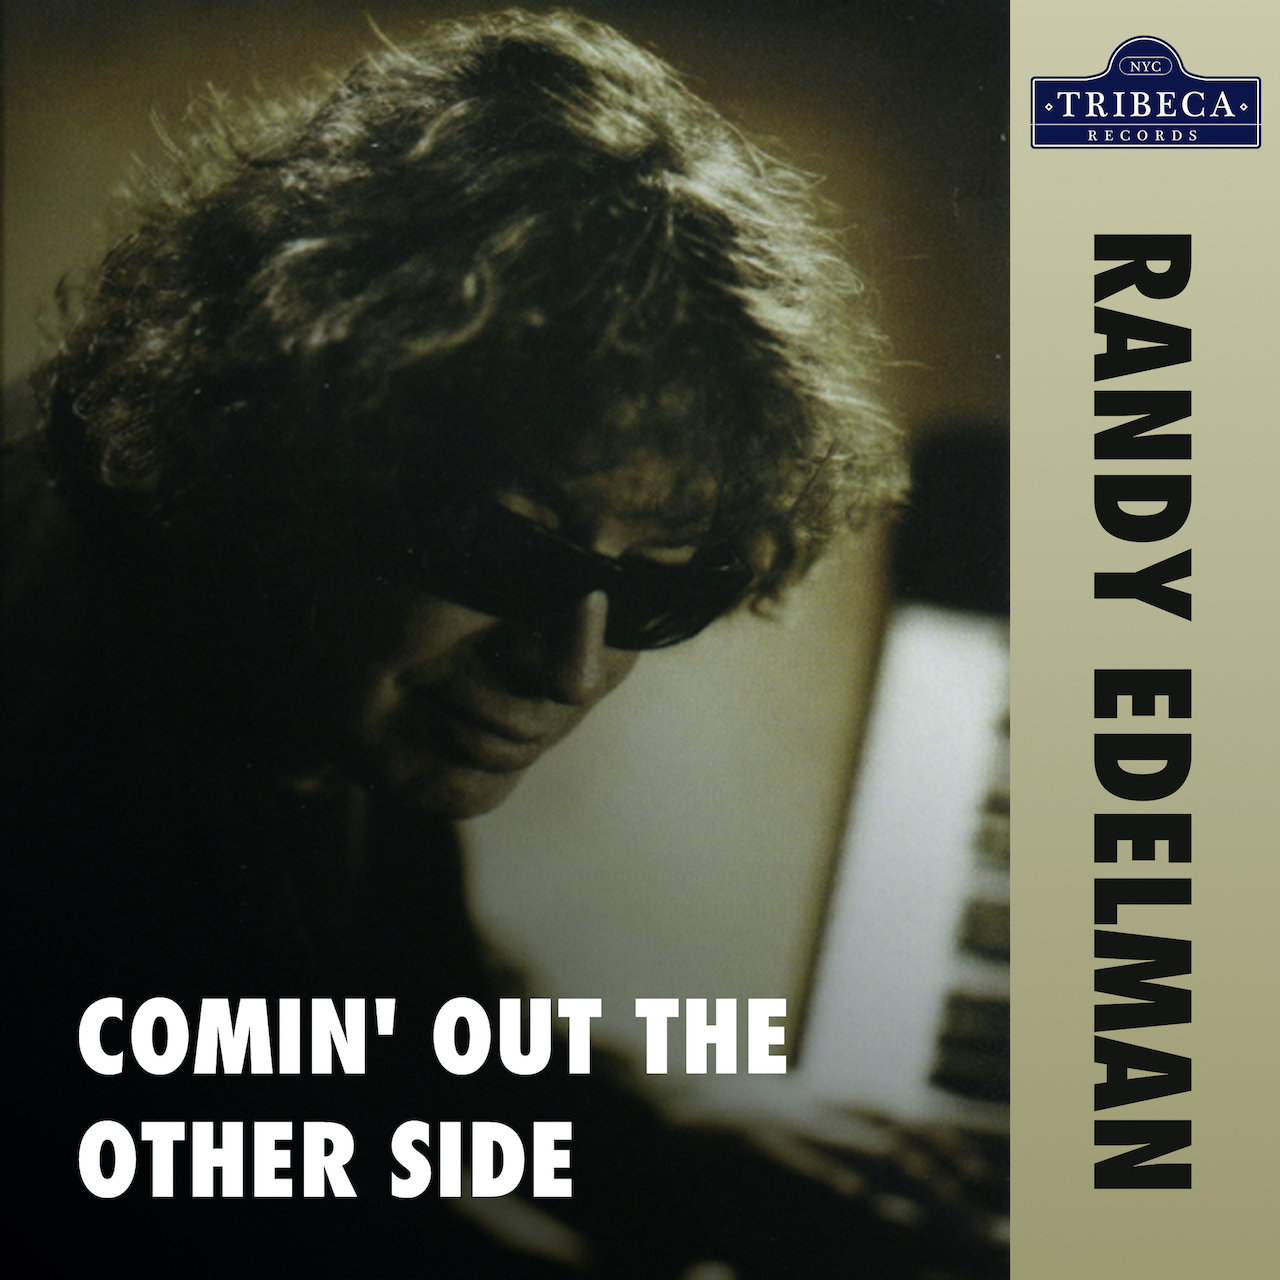 Randy Edelman’s Highly Anticipated New Single "Comin’ Out The Other Side" Now Available Worldwide on Tribeca Records 